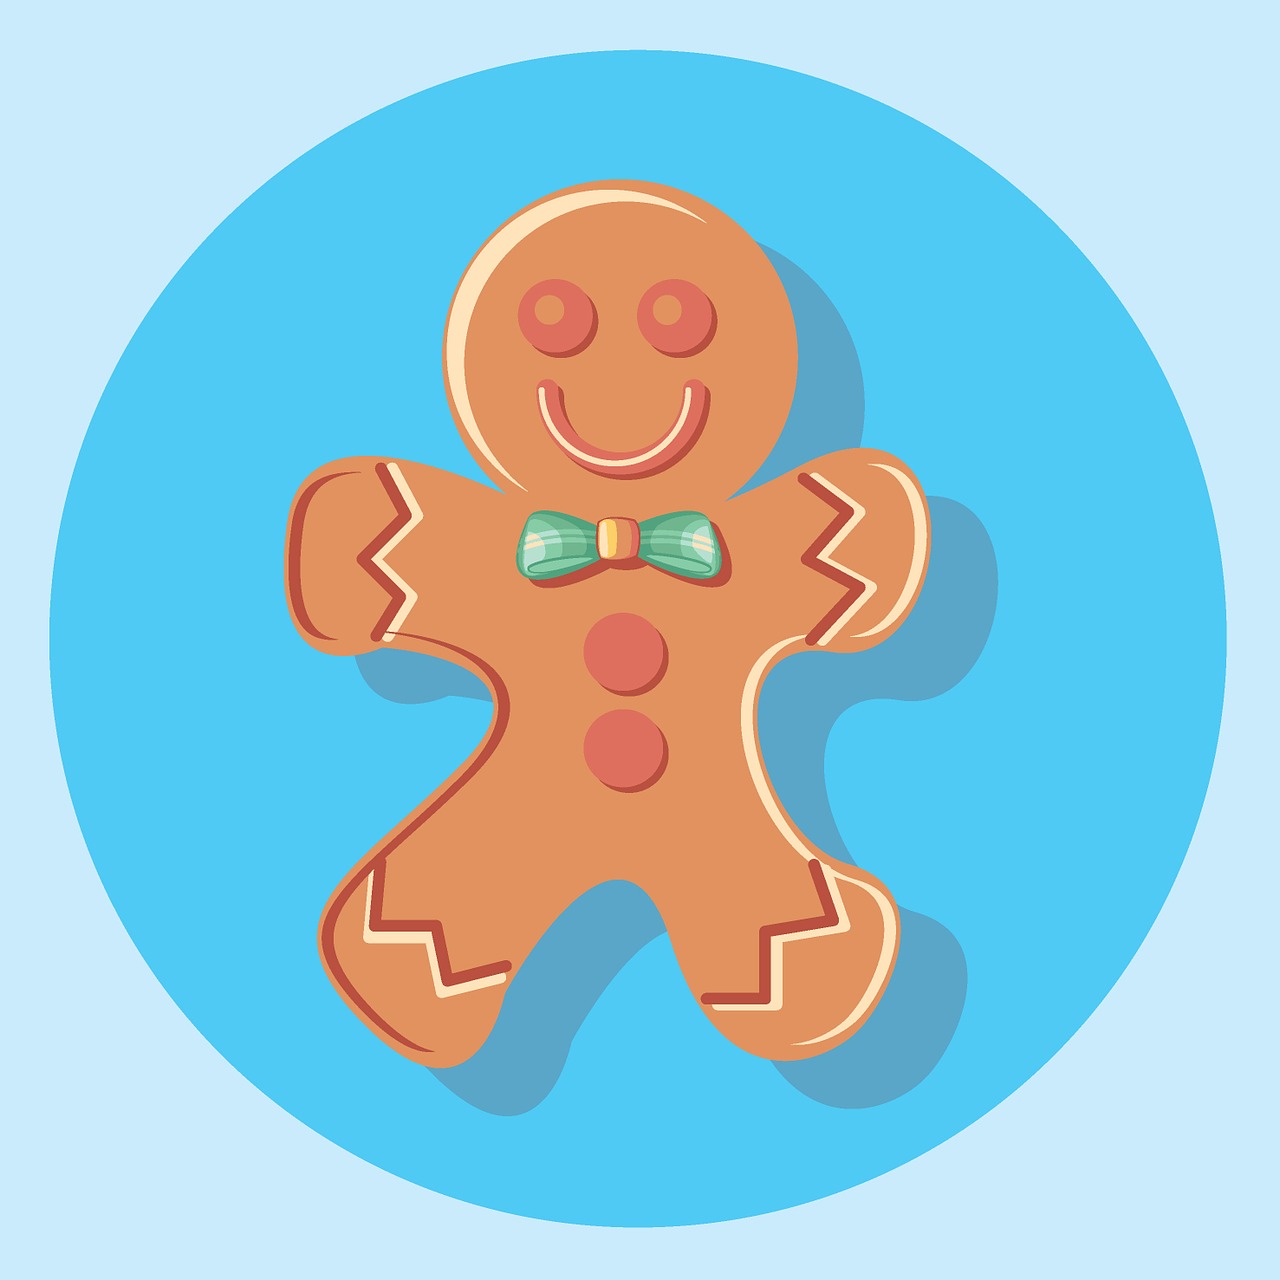 a ginger man in a bow tie on a blue background, an illustration of, cookies, flat icon, round, smooth illustration